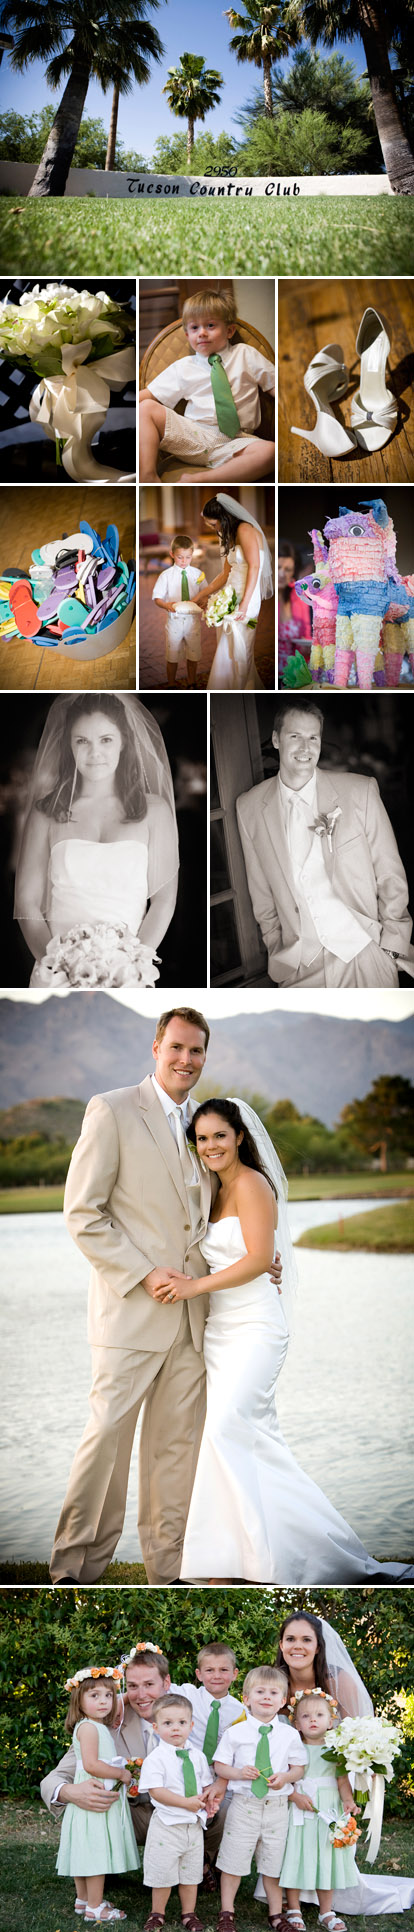 Tuscan, Arizona outdoor wedding ceremony at the Tuscan Country Club, images by Roberto Valenzuela Photography